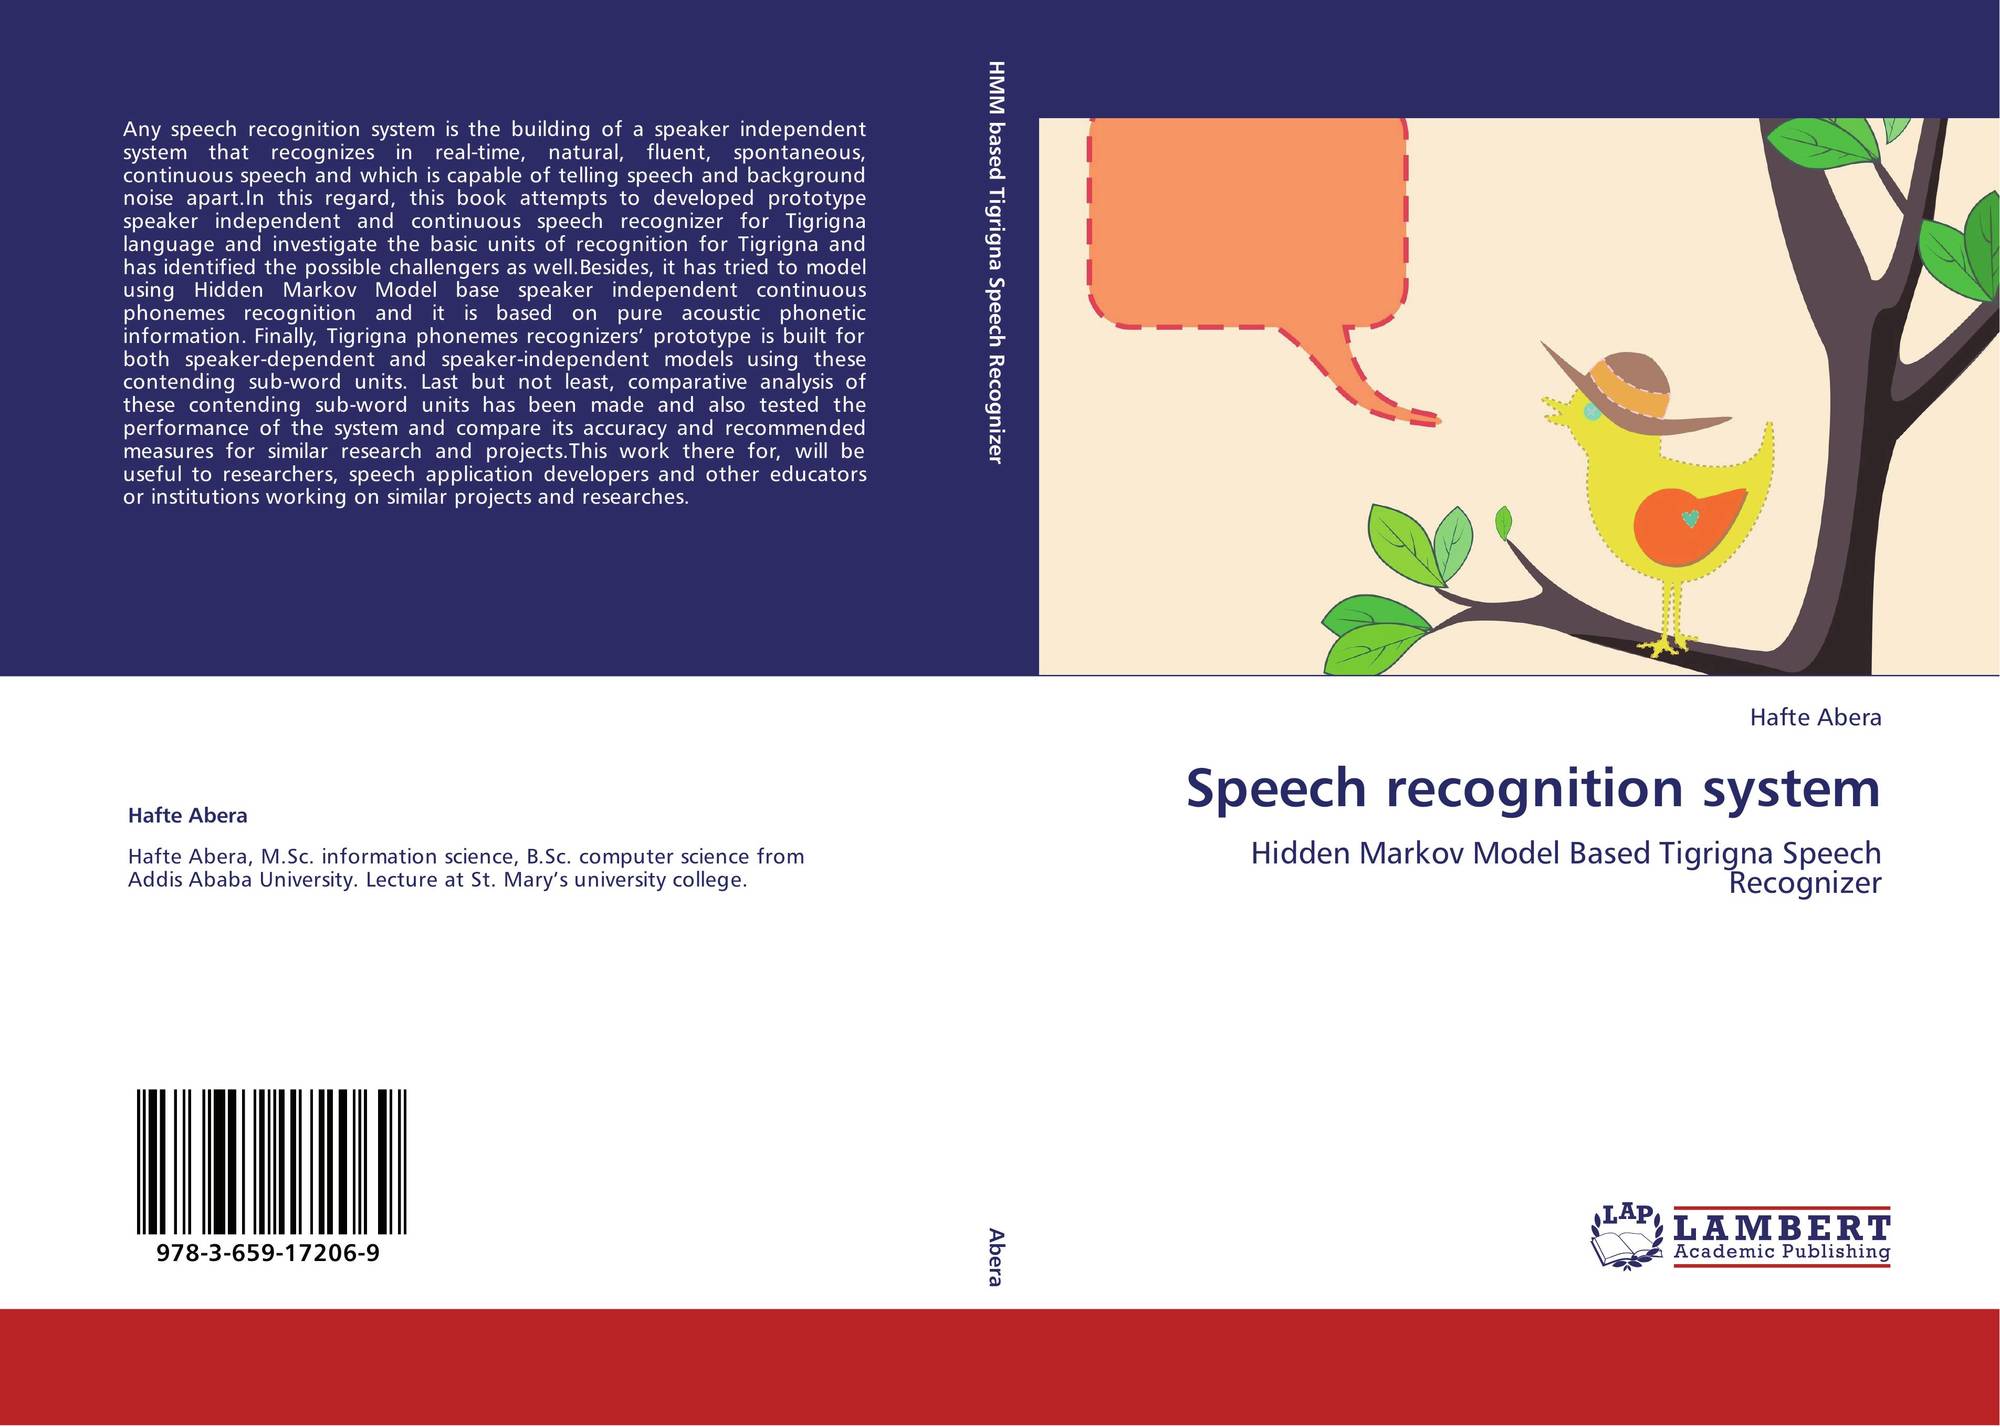 book about speech recognition